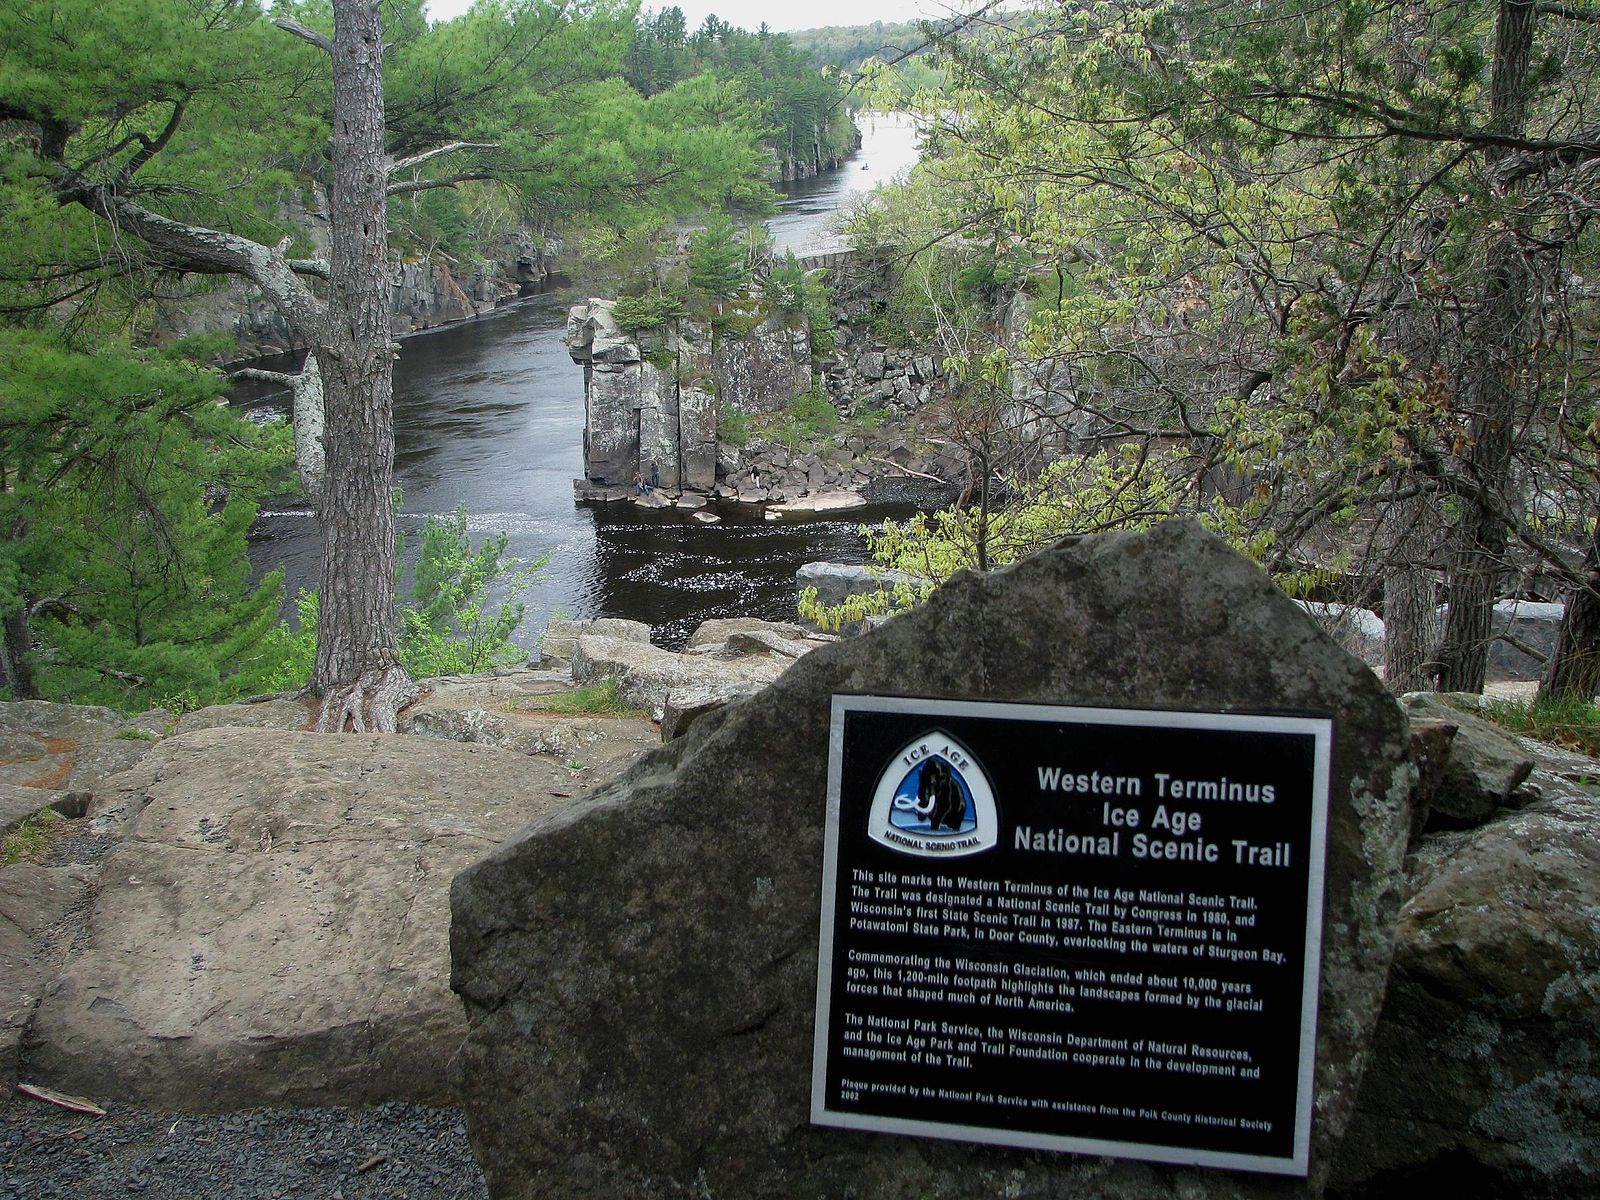 File:Western Terminus of the Ice Age Trail (St. Croix Falls, Wisconsin).jpg...